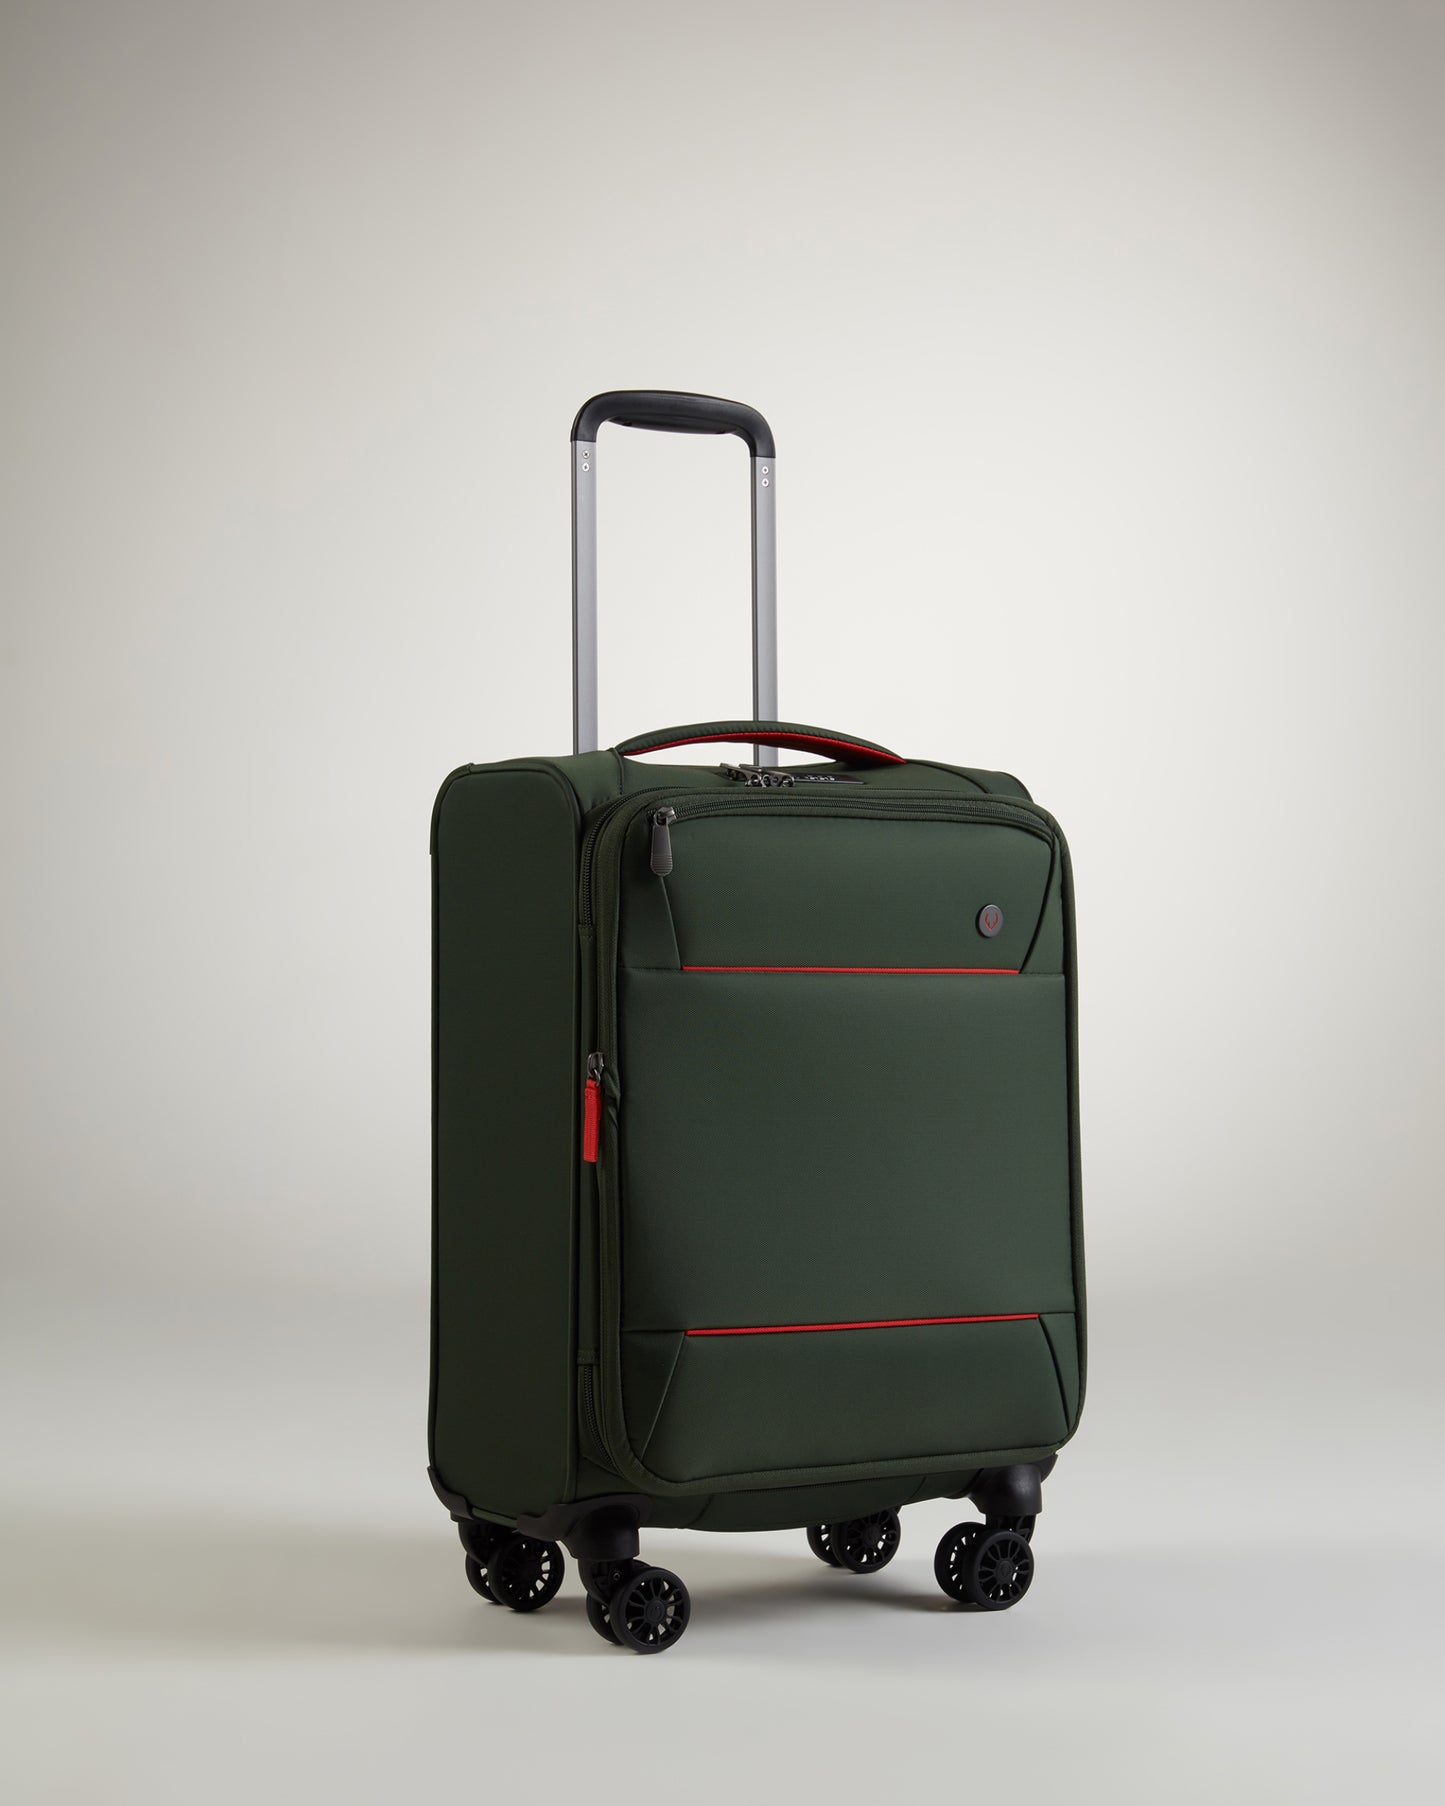 Brixham Carry-On in Canopy Green